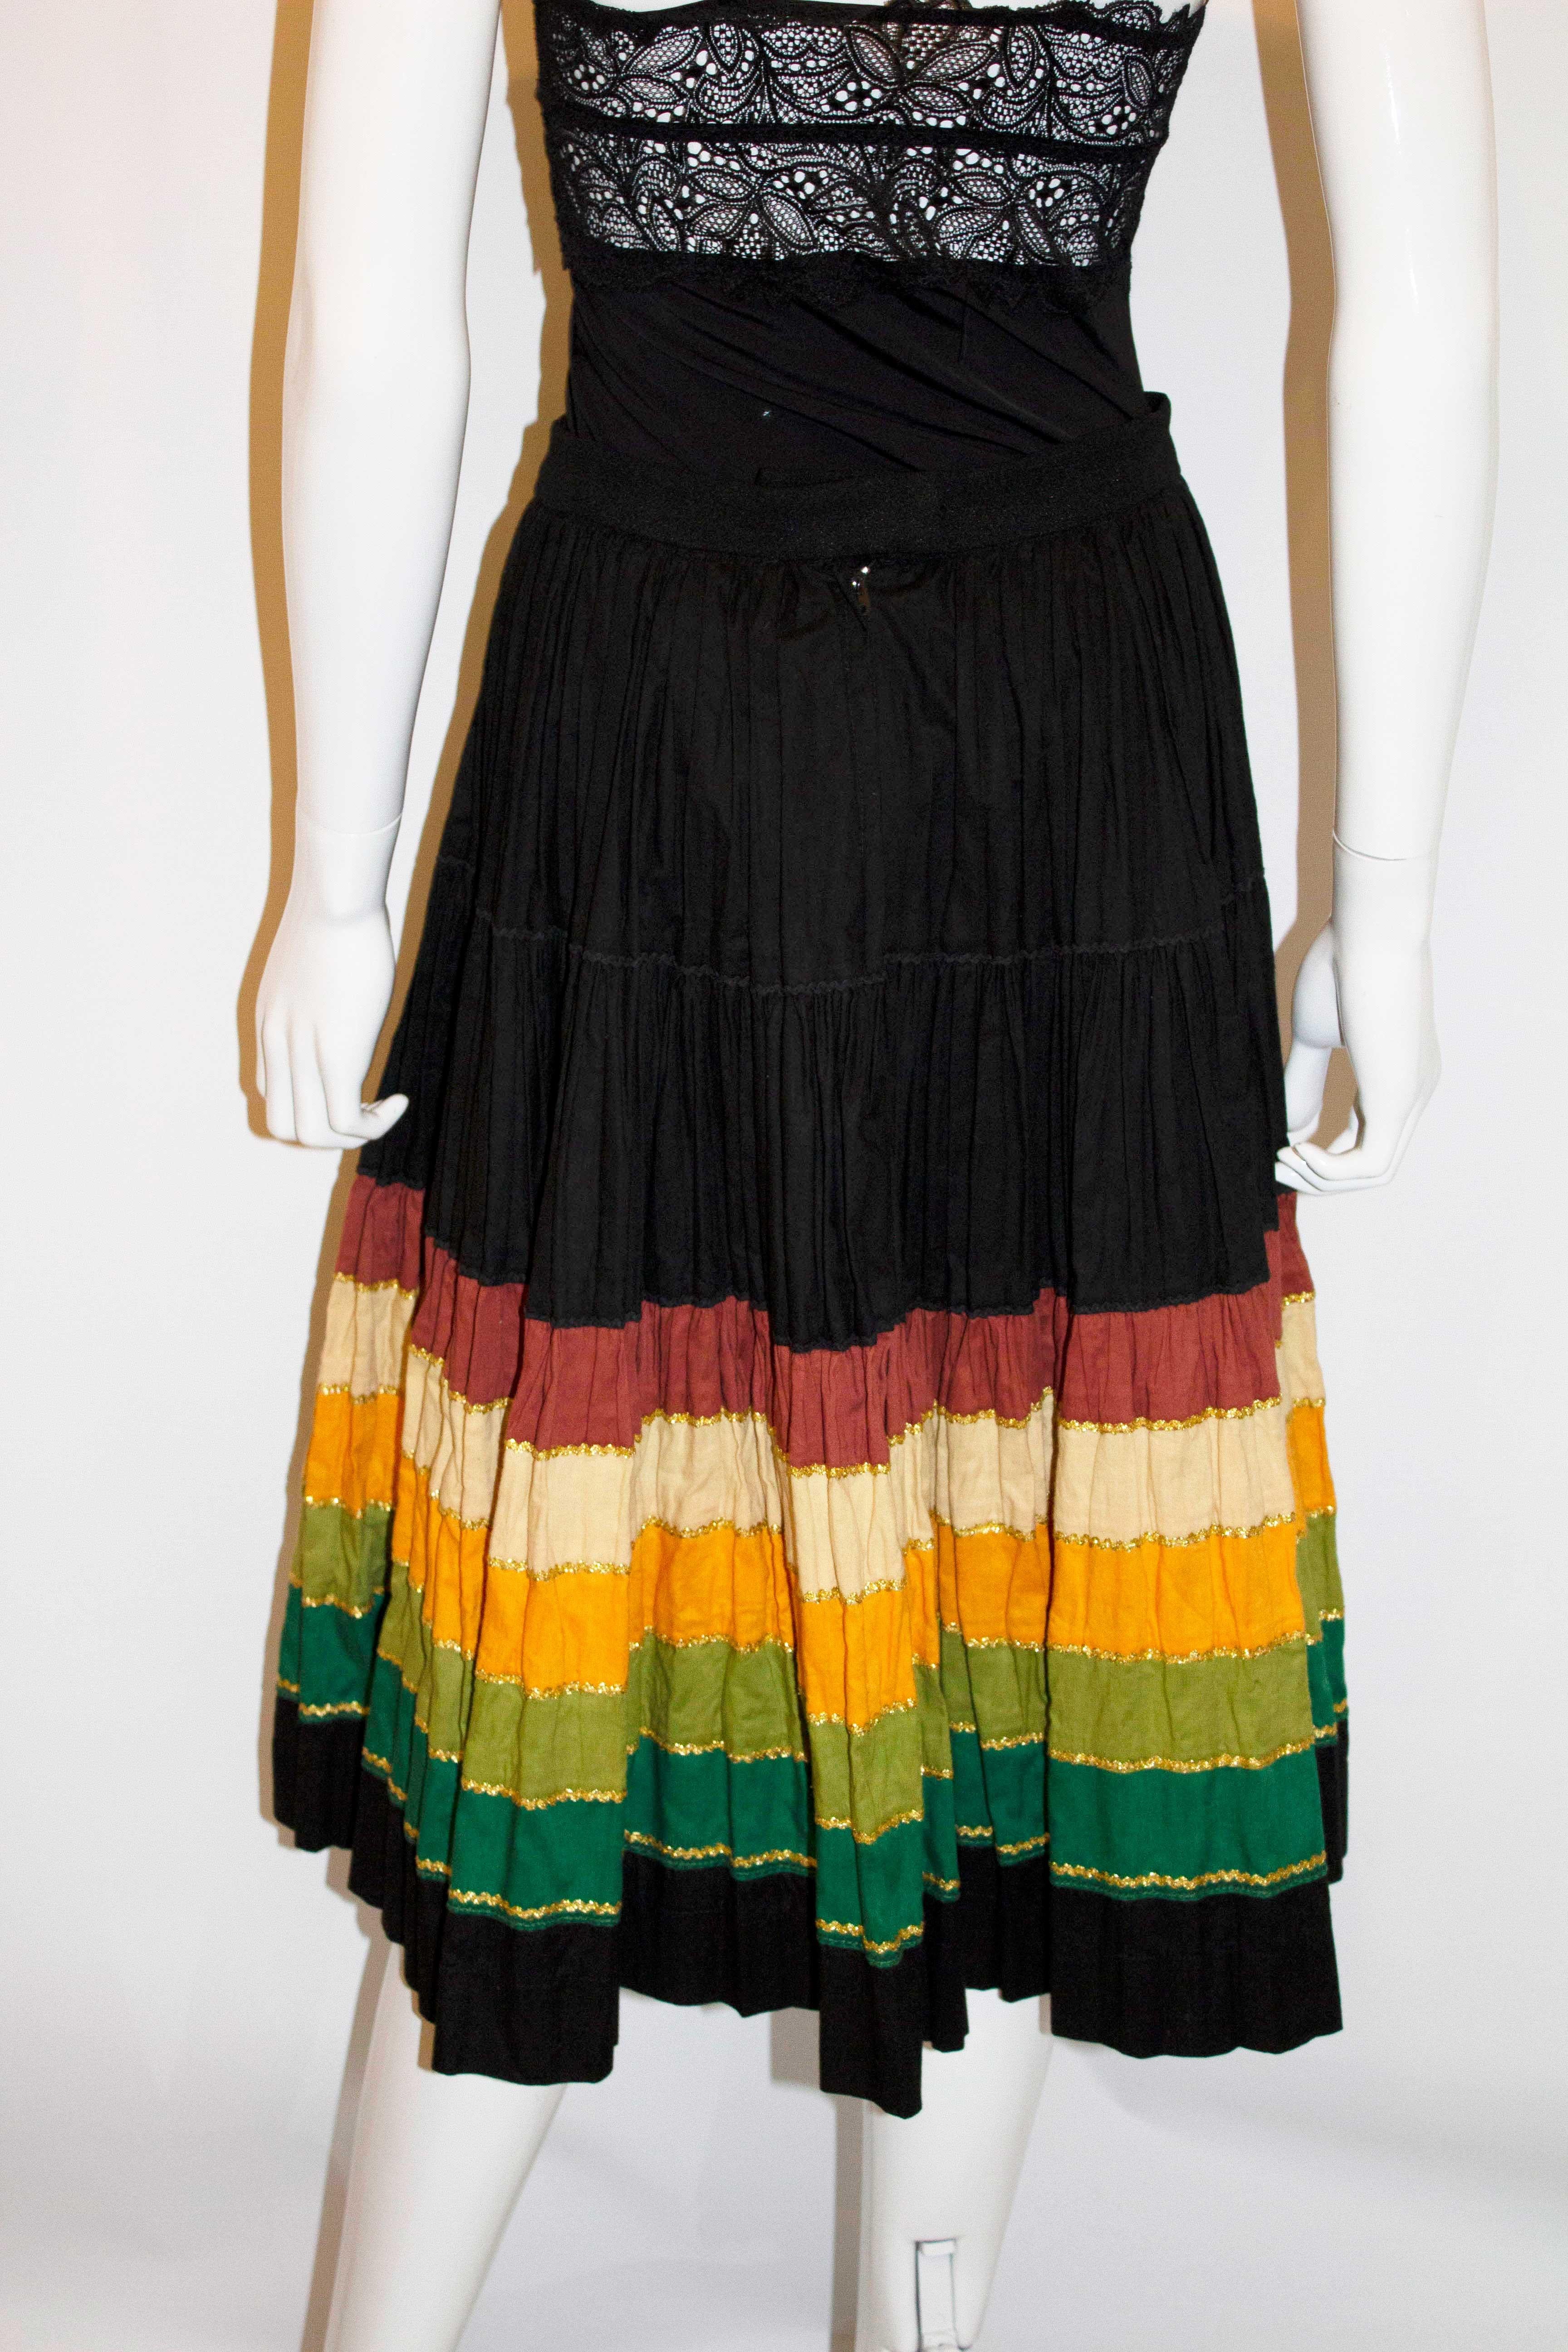 A fun skirt by Hemisphere Paris. The skirt is black with pleats, and colourful and gold braid detail at the hem. Measurements: Waist 28'', length 22''